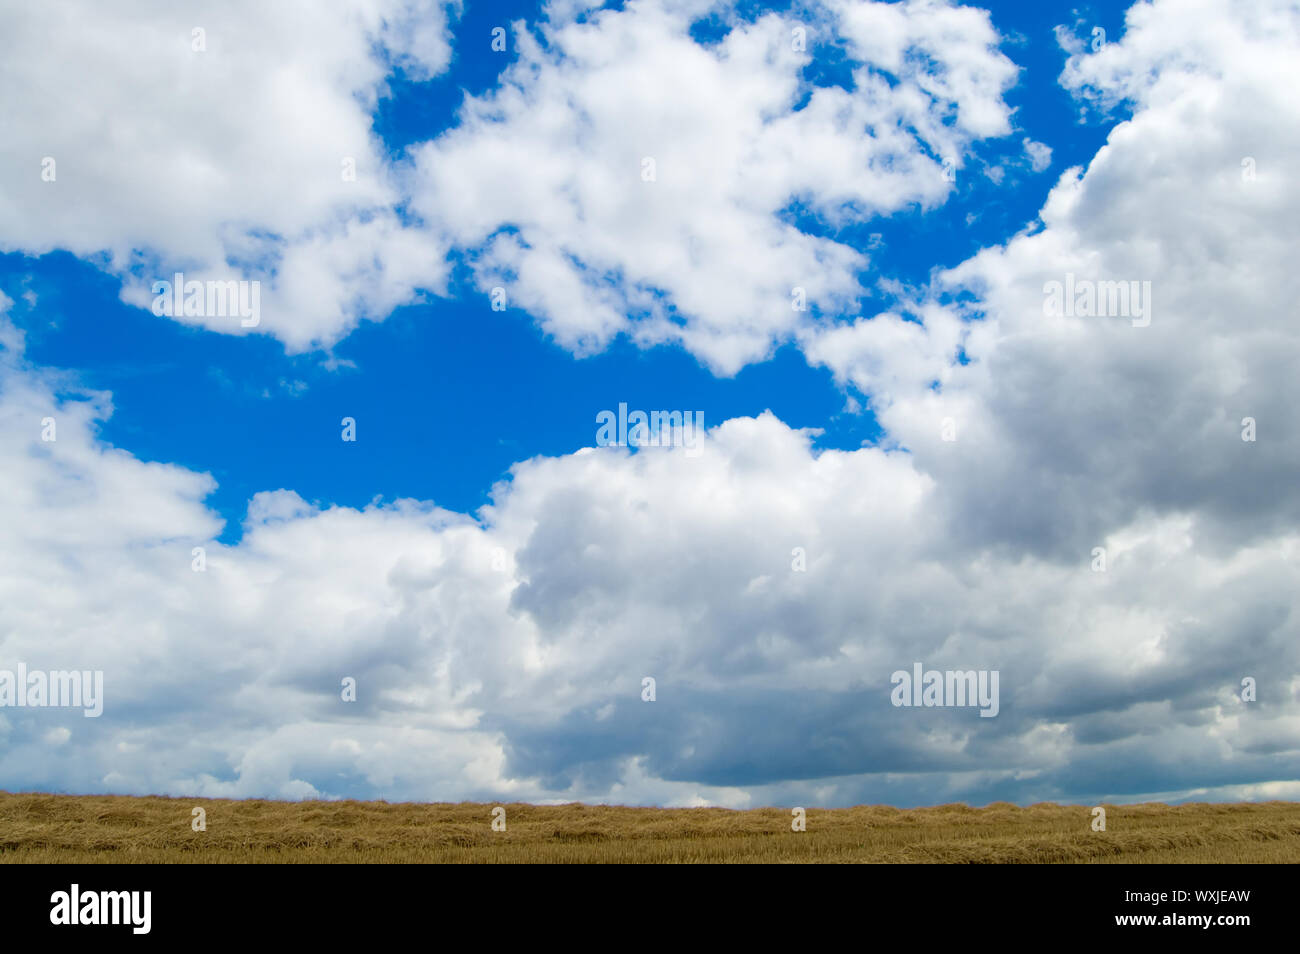 view of rural locality with low clouds in the background Stock Photo